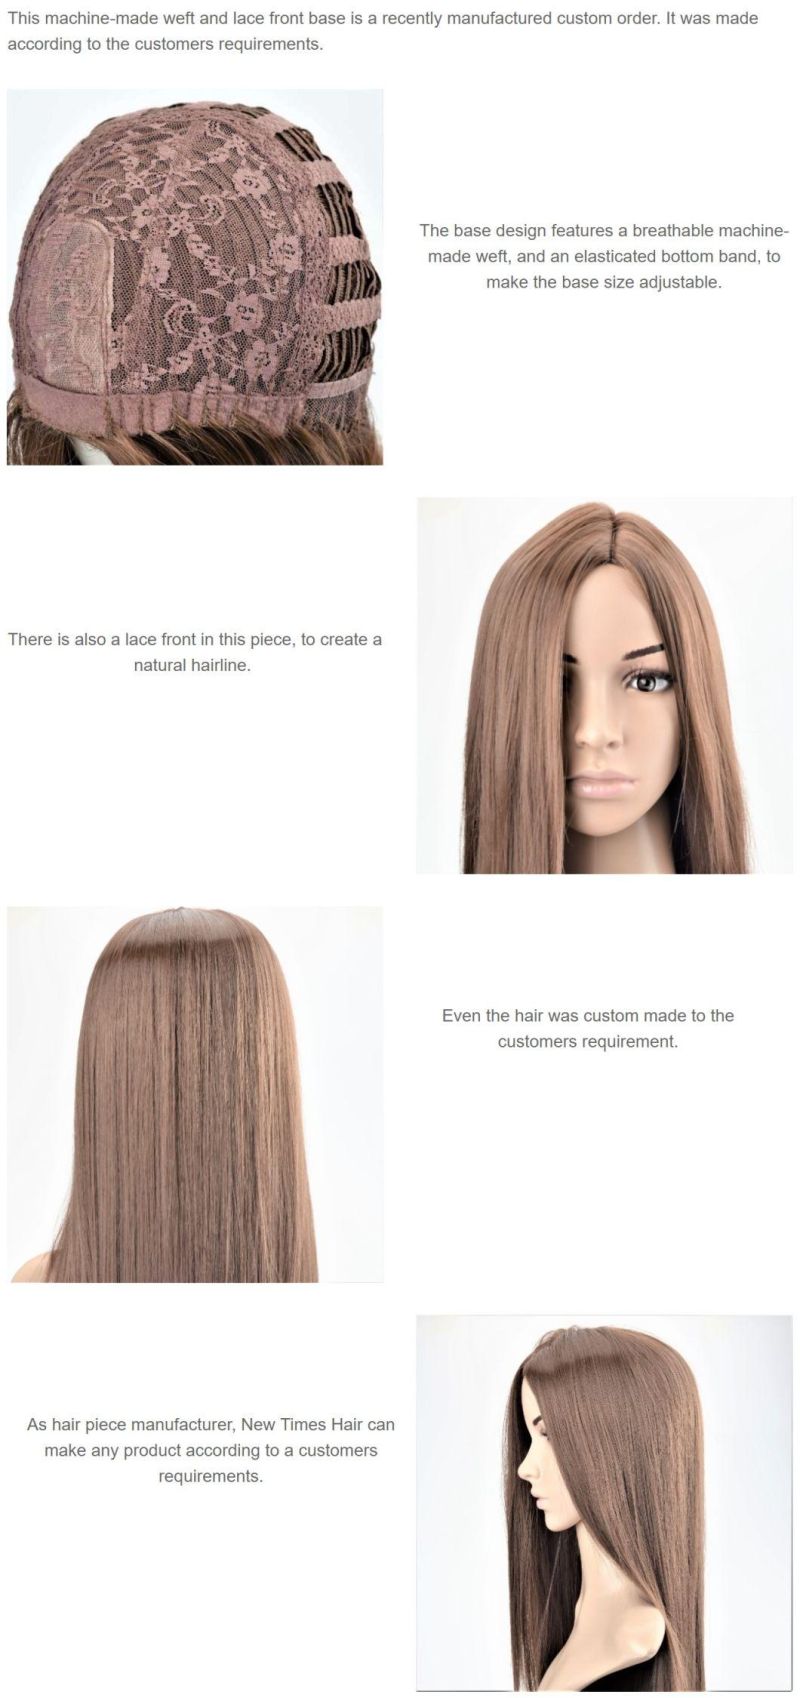 Customized Elasticated Machine-Made Weft and Lace Front Ladies Wig